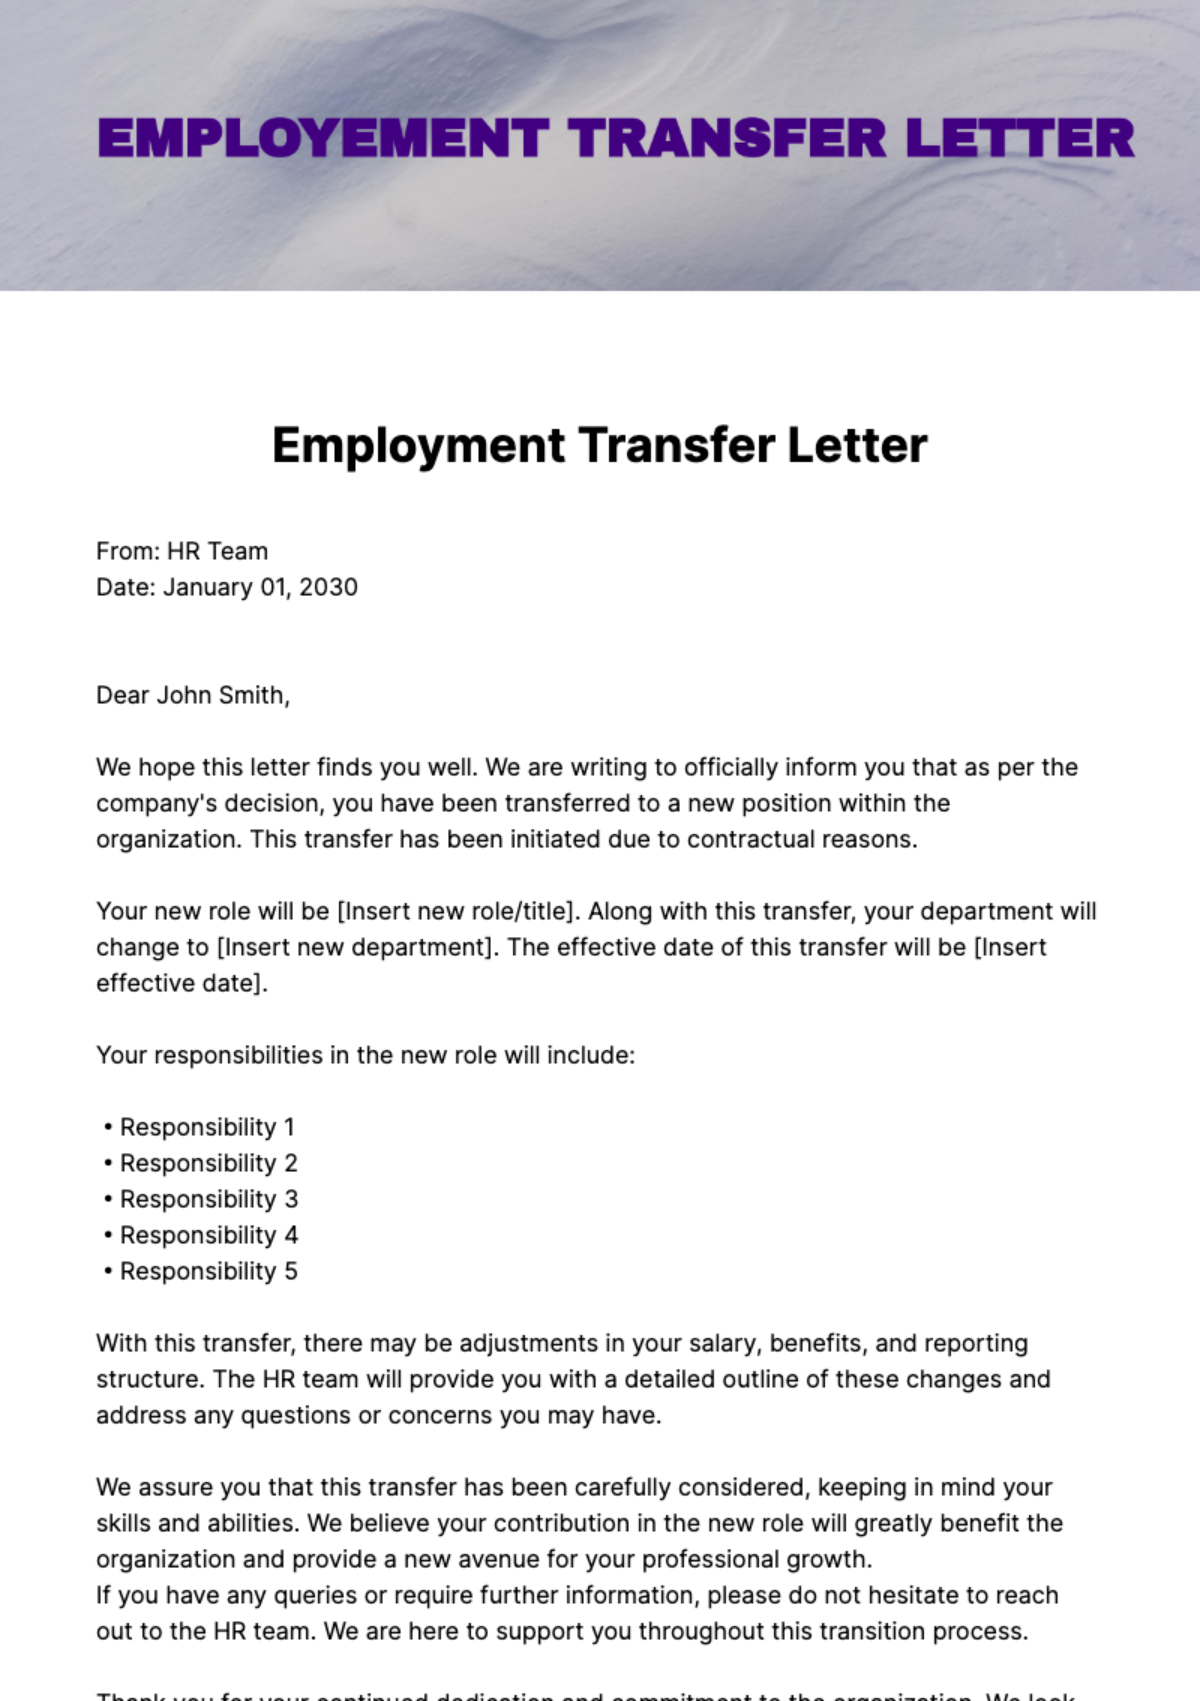 Employment Transfer Letter Template